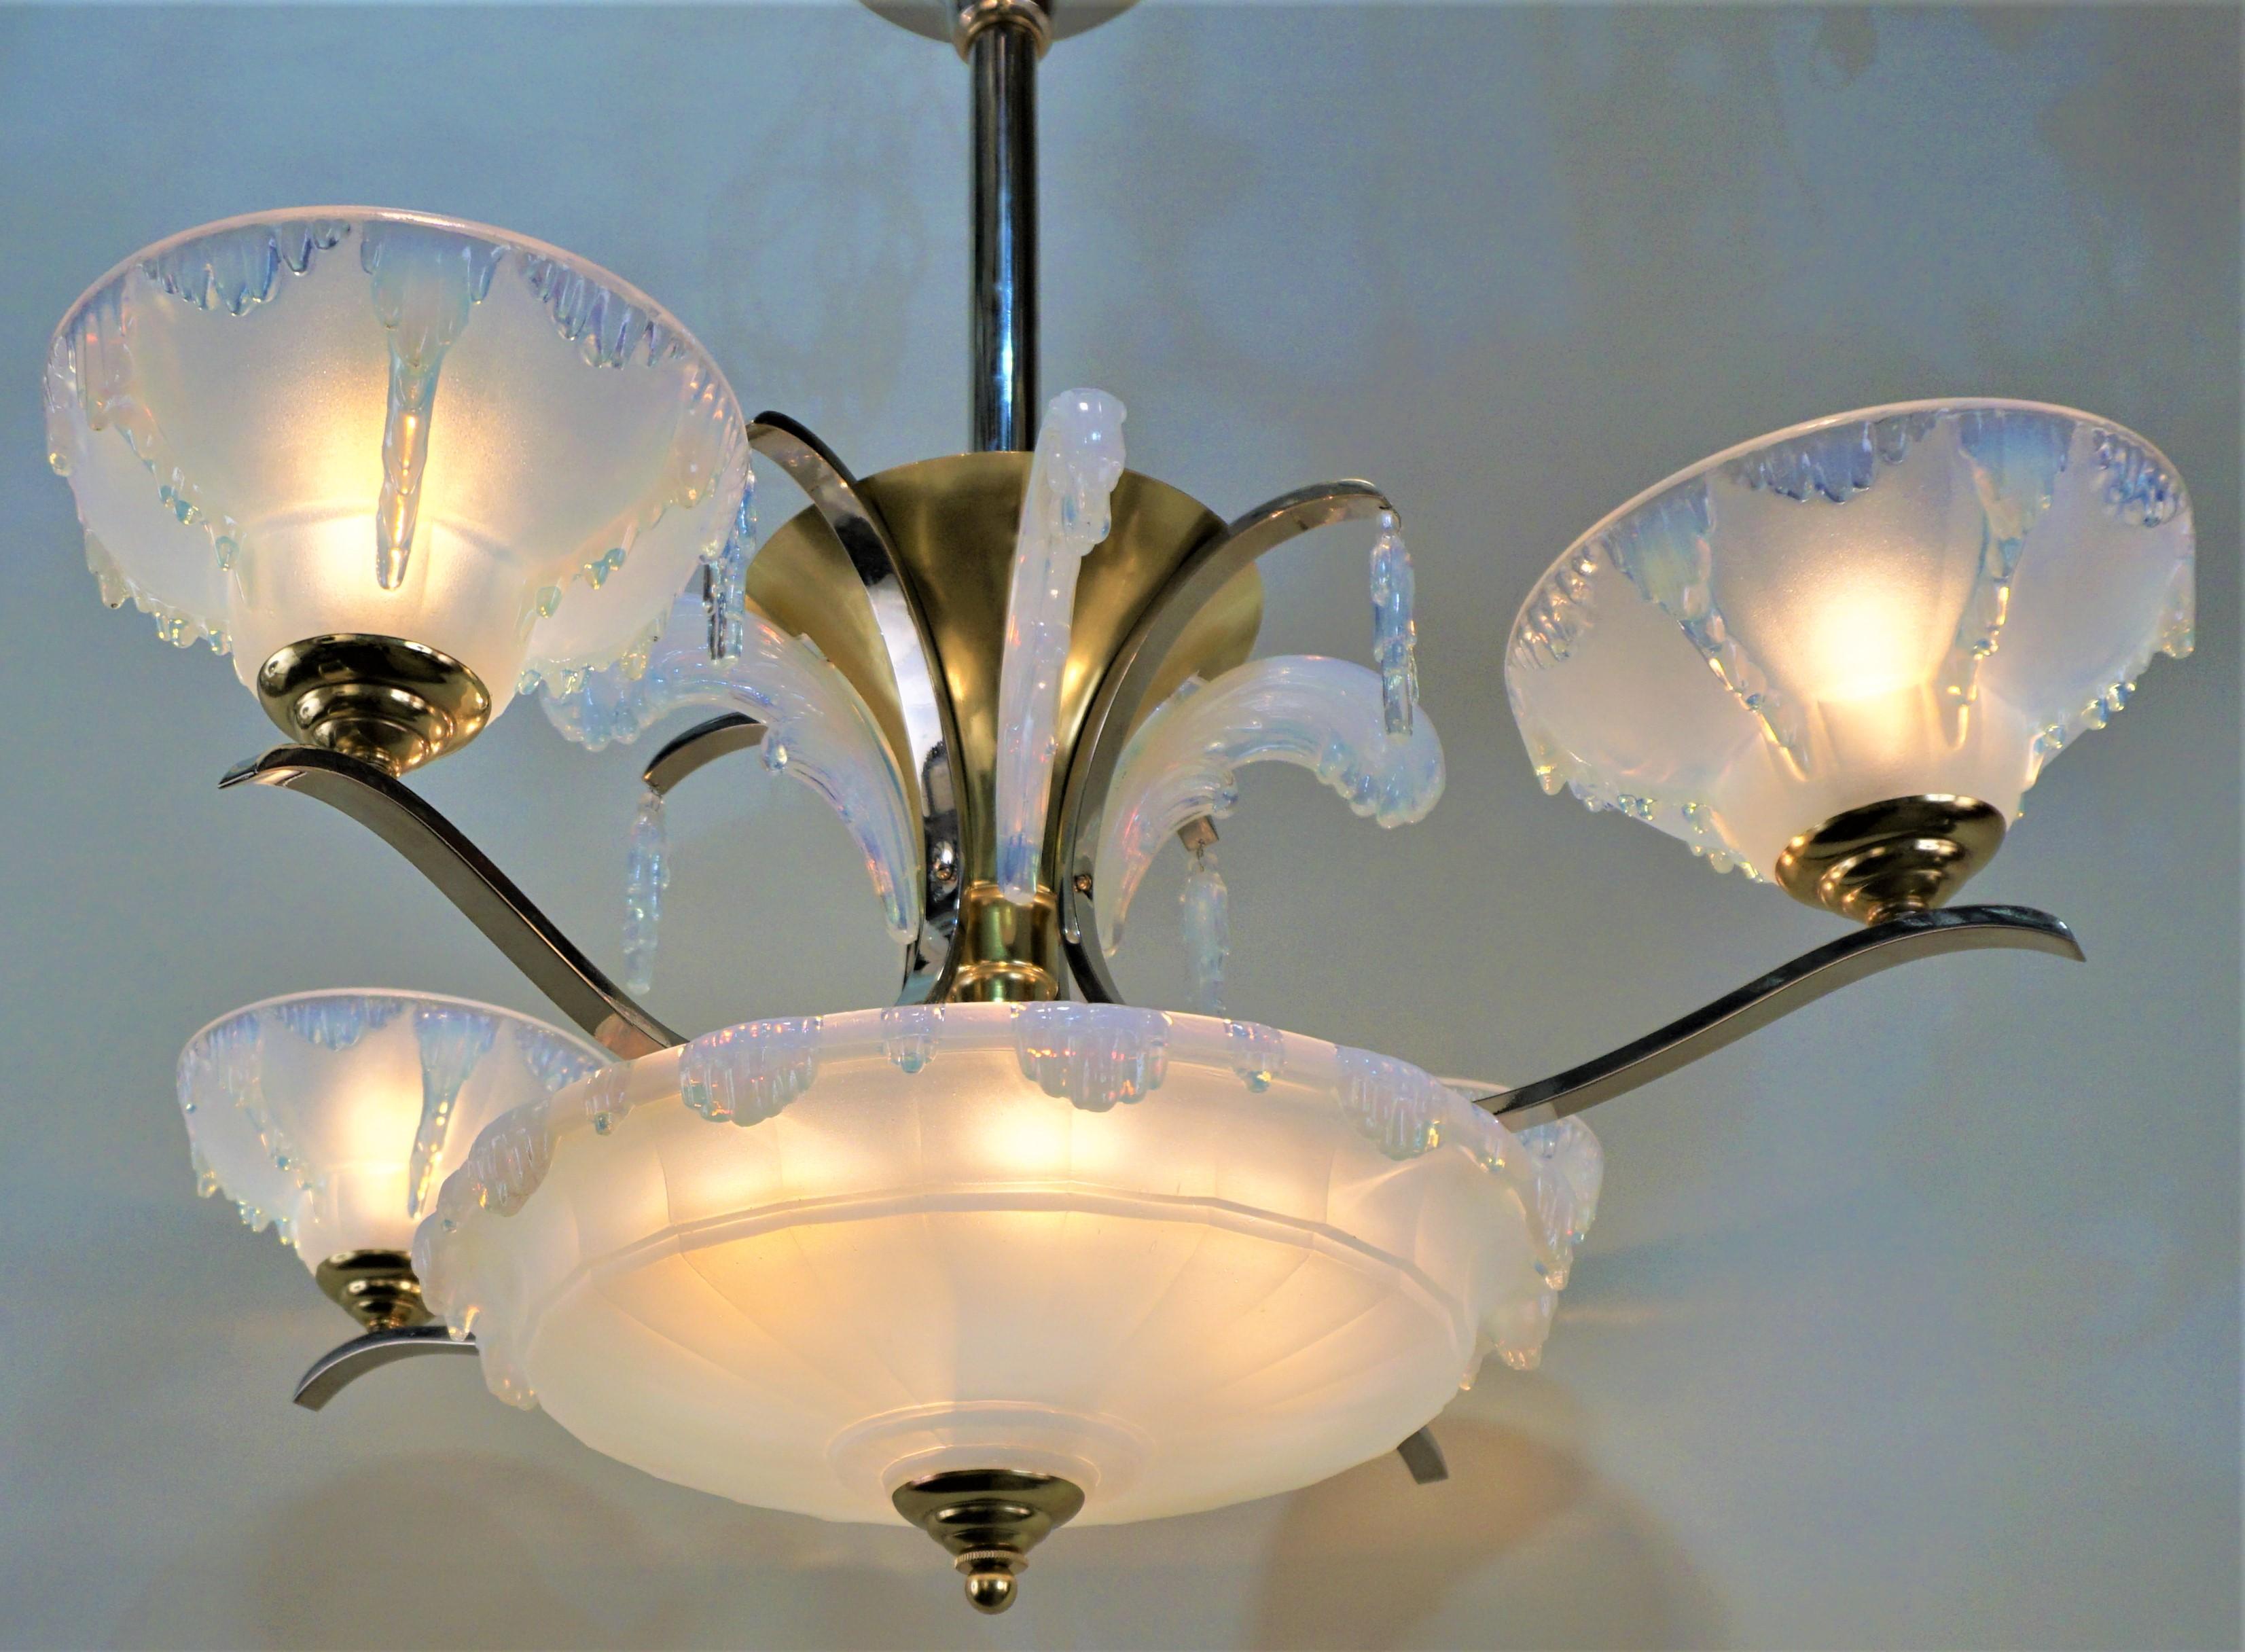 Bronze and nickel Art Deco four arm, five beautiful opalescent glass lampshades by Ezan. This 1930s chandelier has total of ten lights with 60 watt max each.